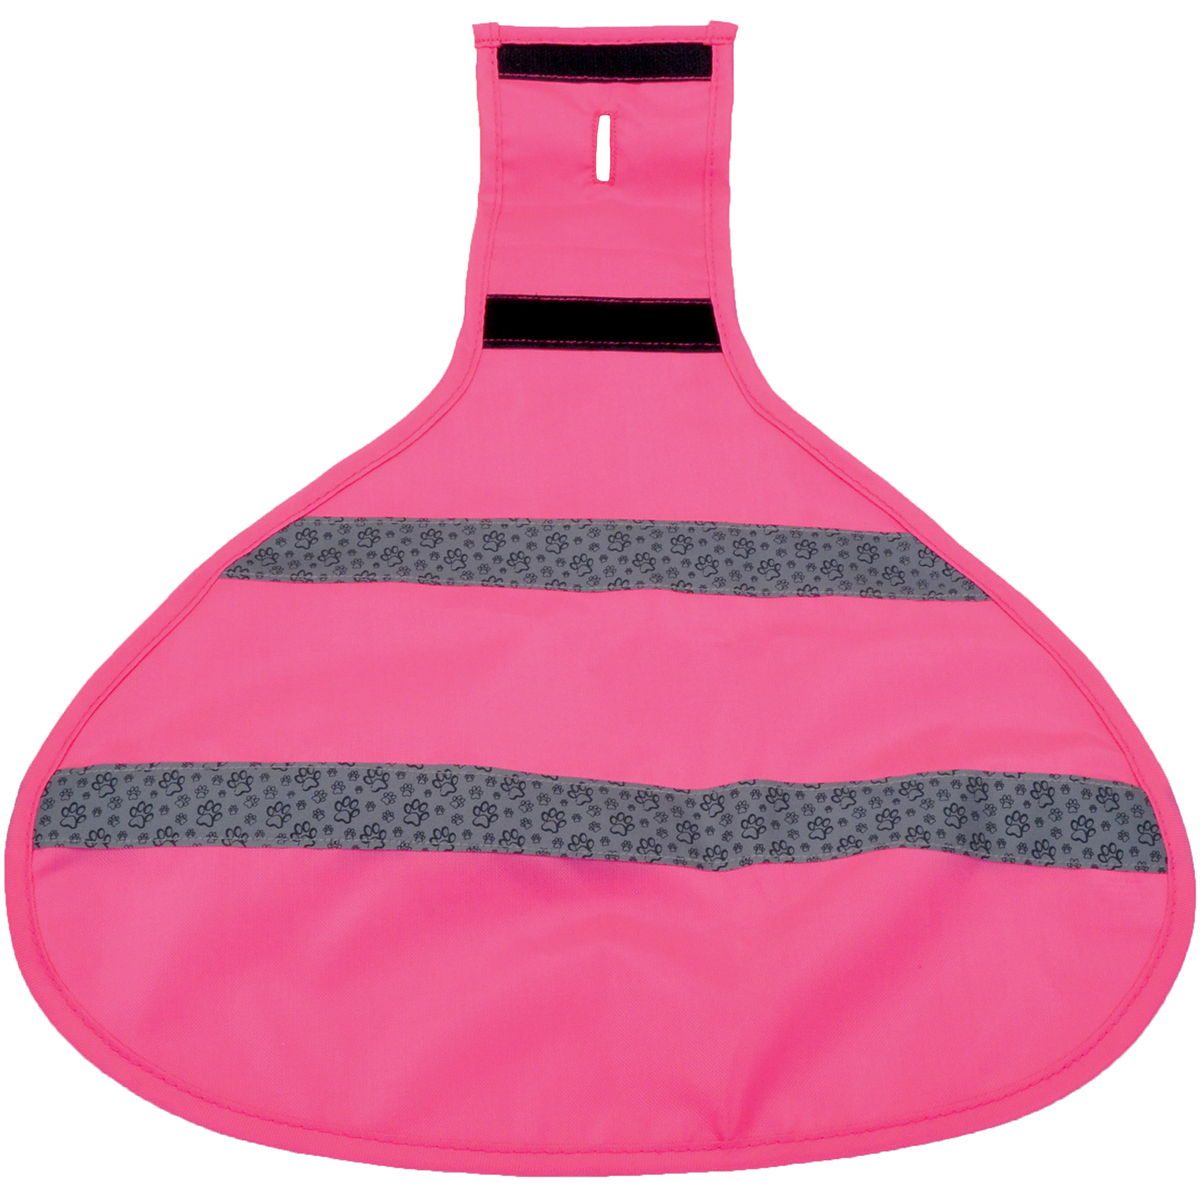 Reflective Safety Vest, Neon Pink - Small